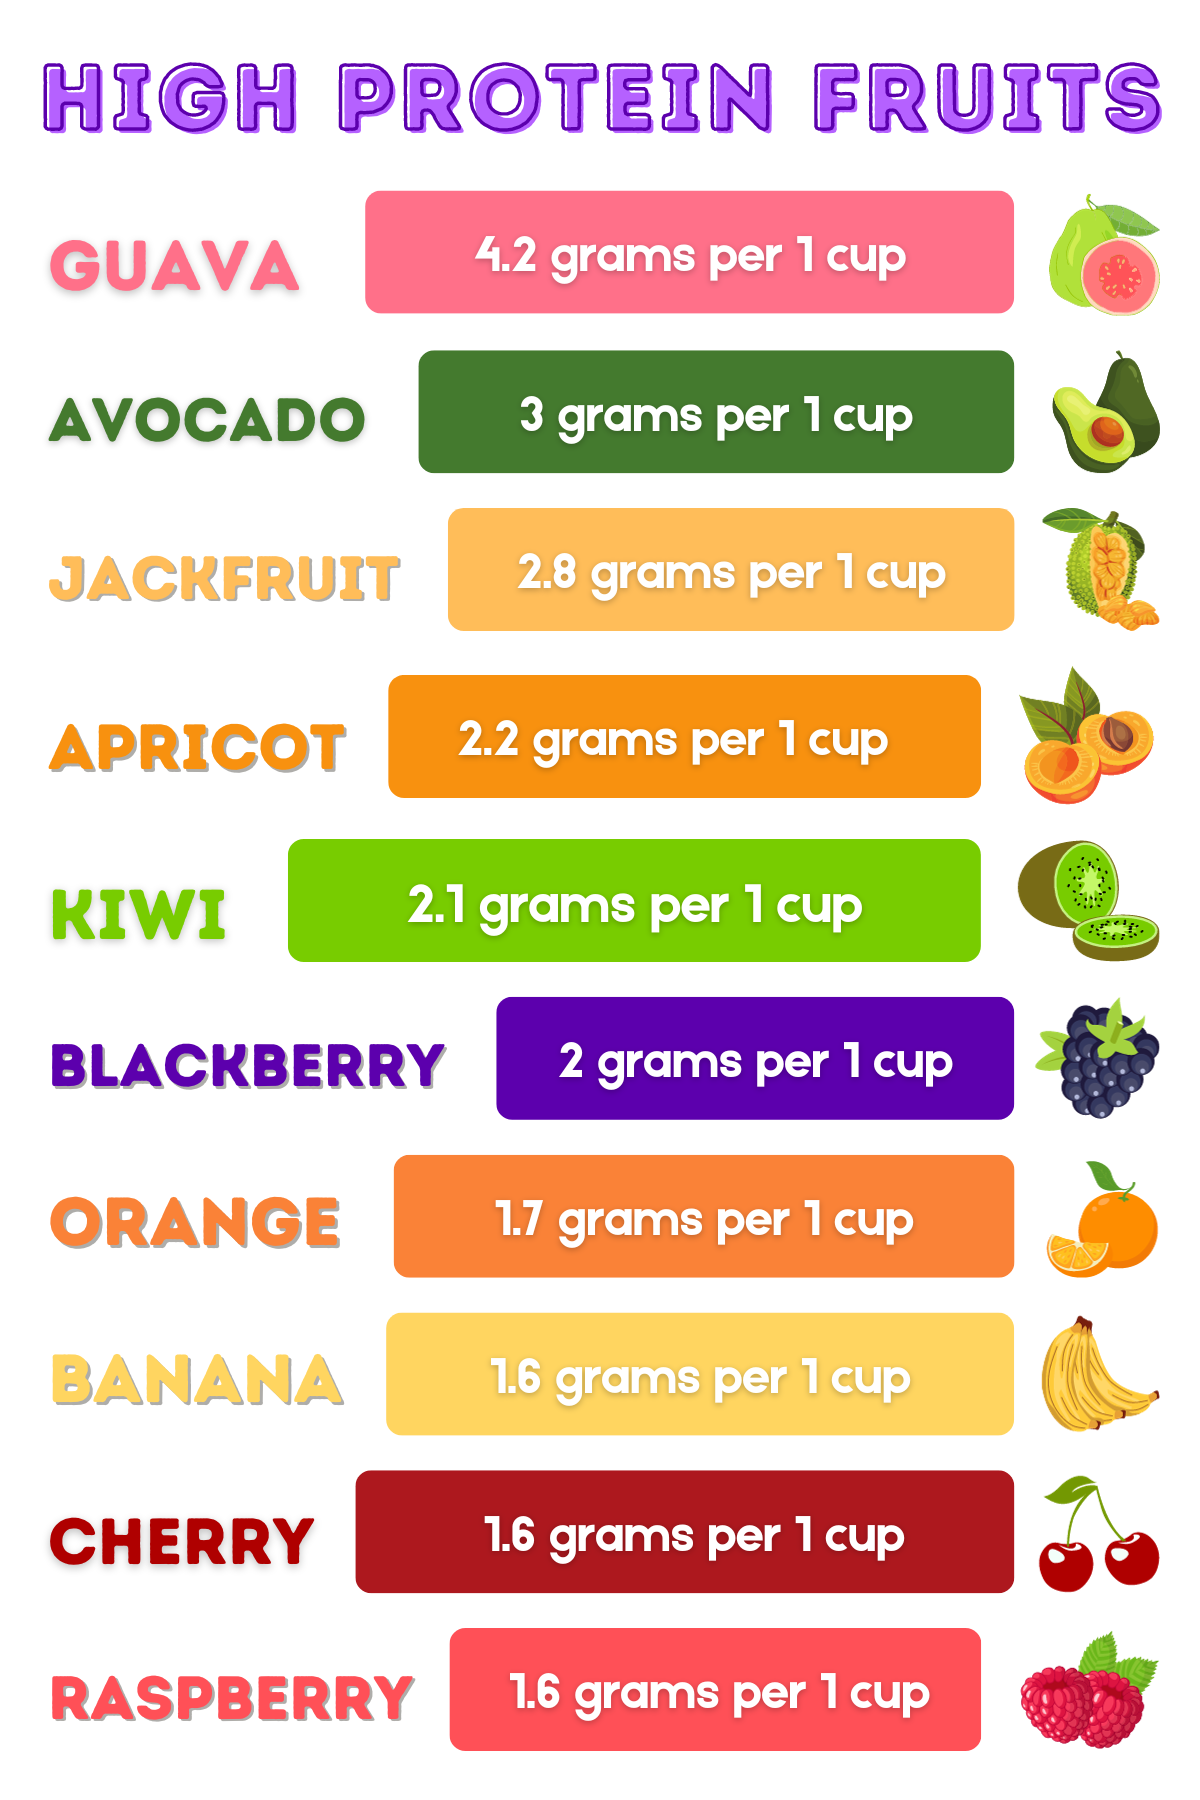 High protein fruits infographic.